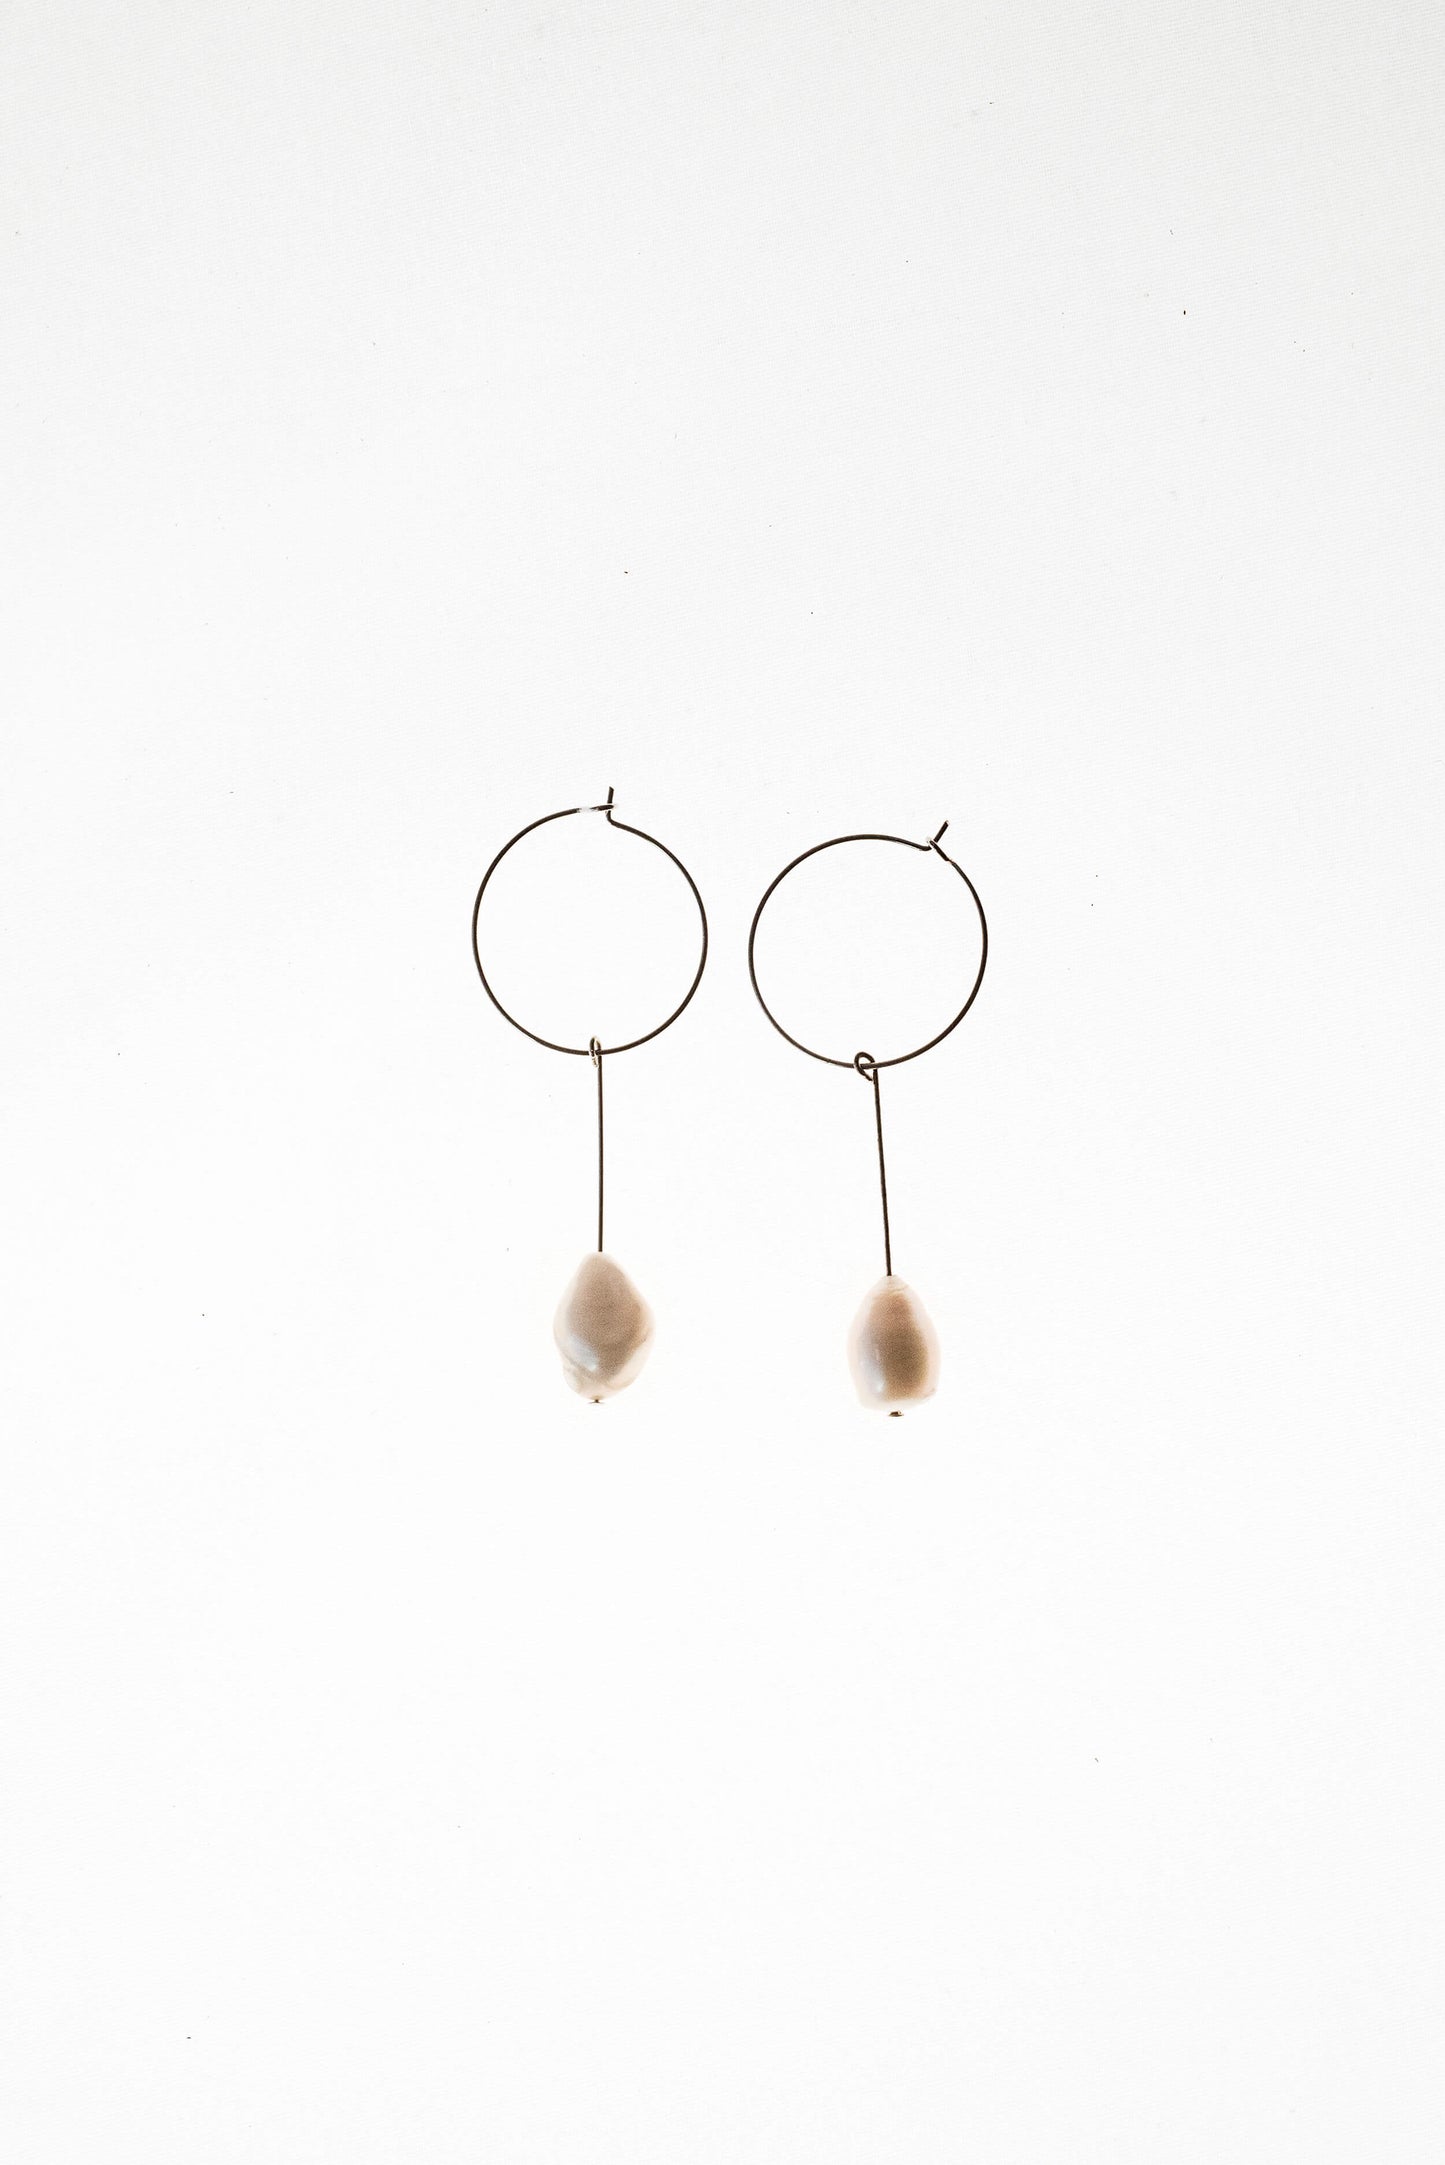 Earrings made of galvanized brass and freshwater pearl.